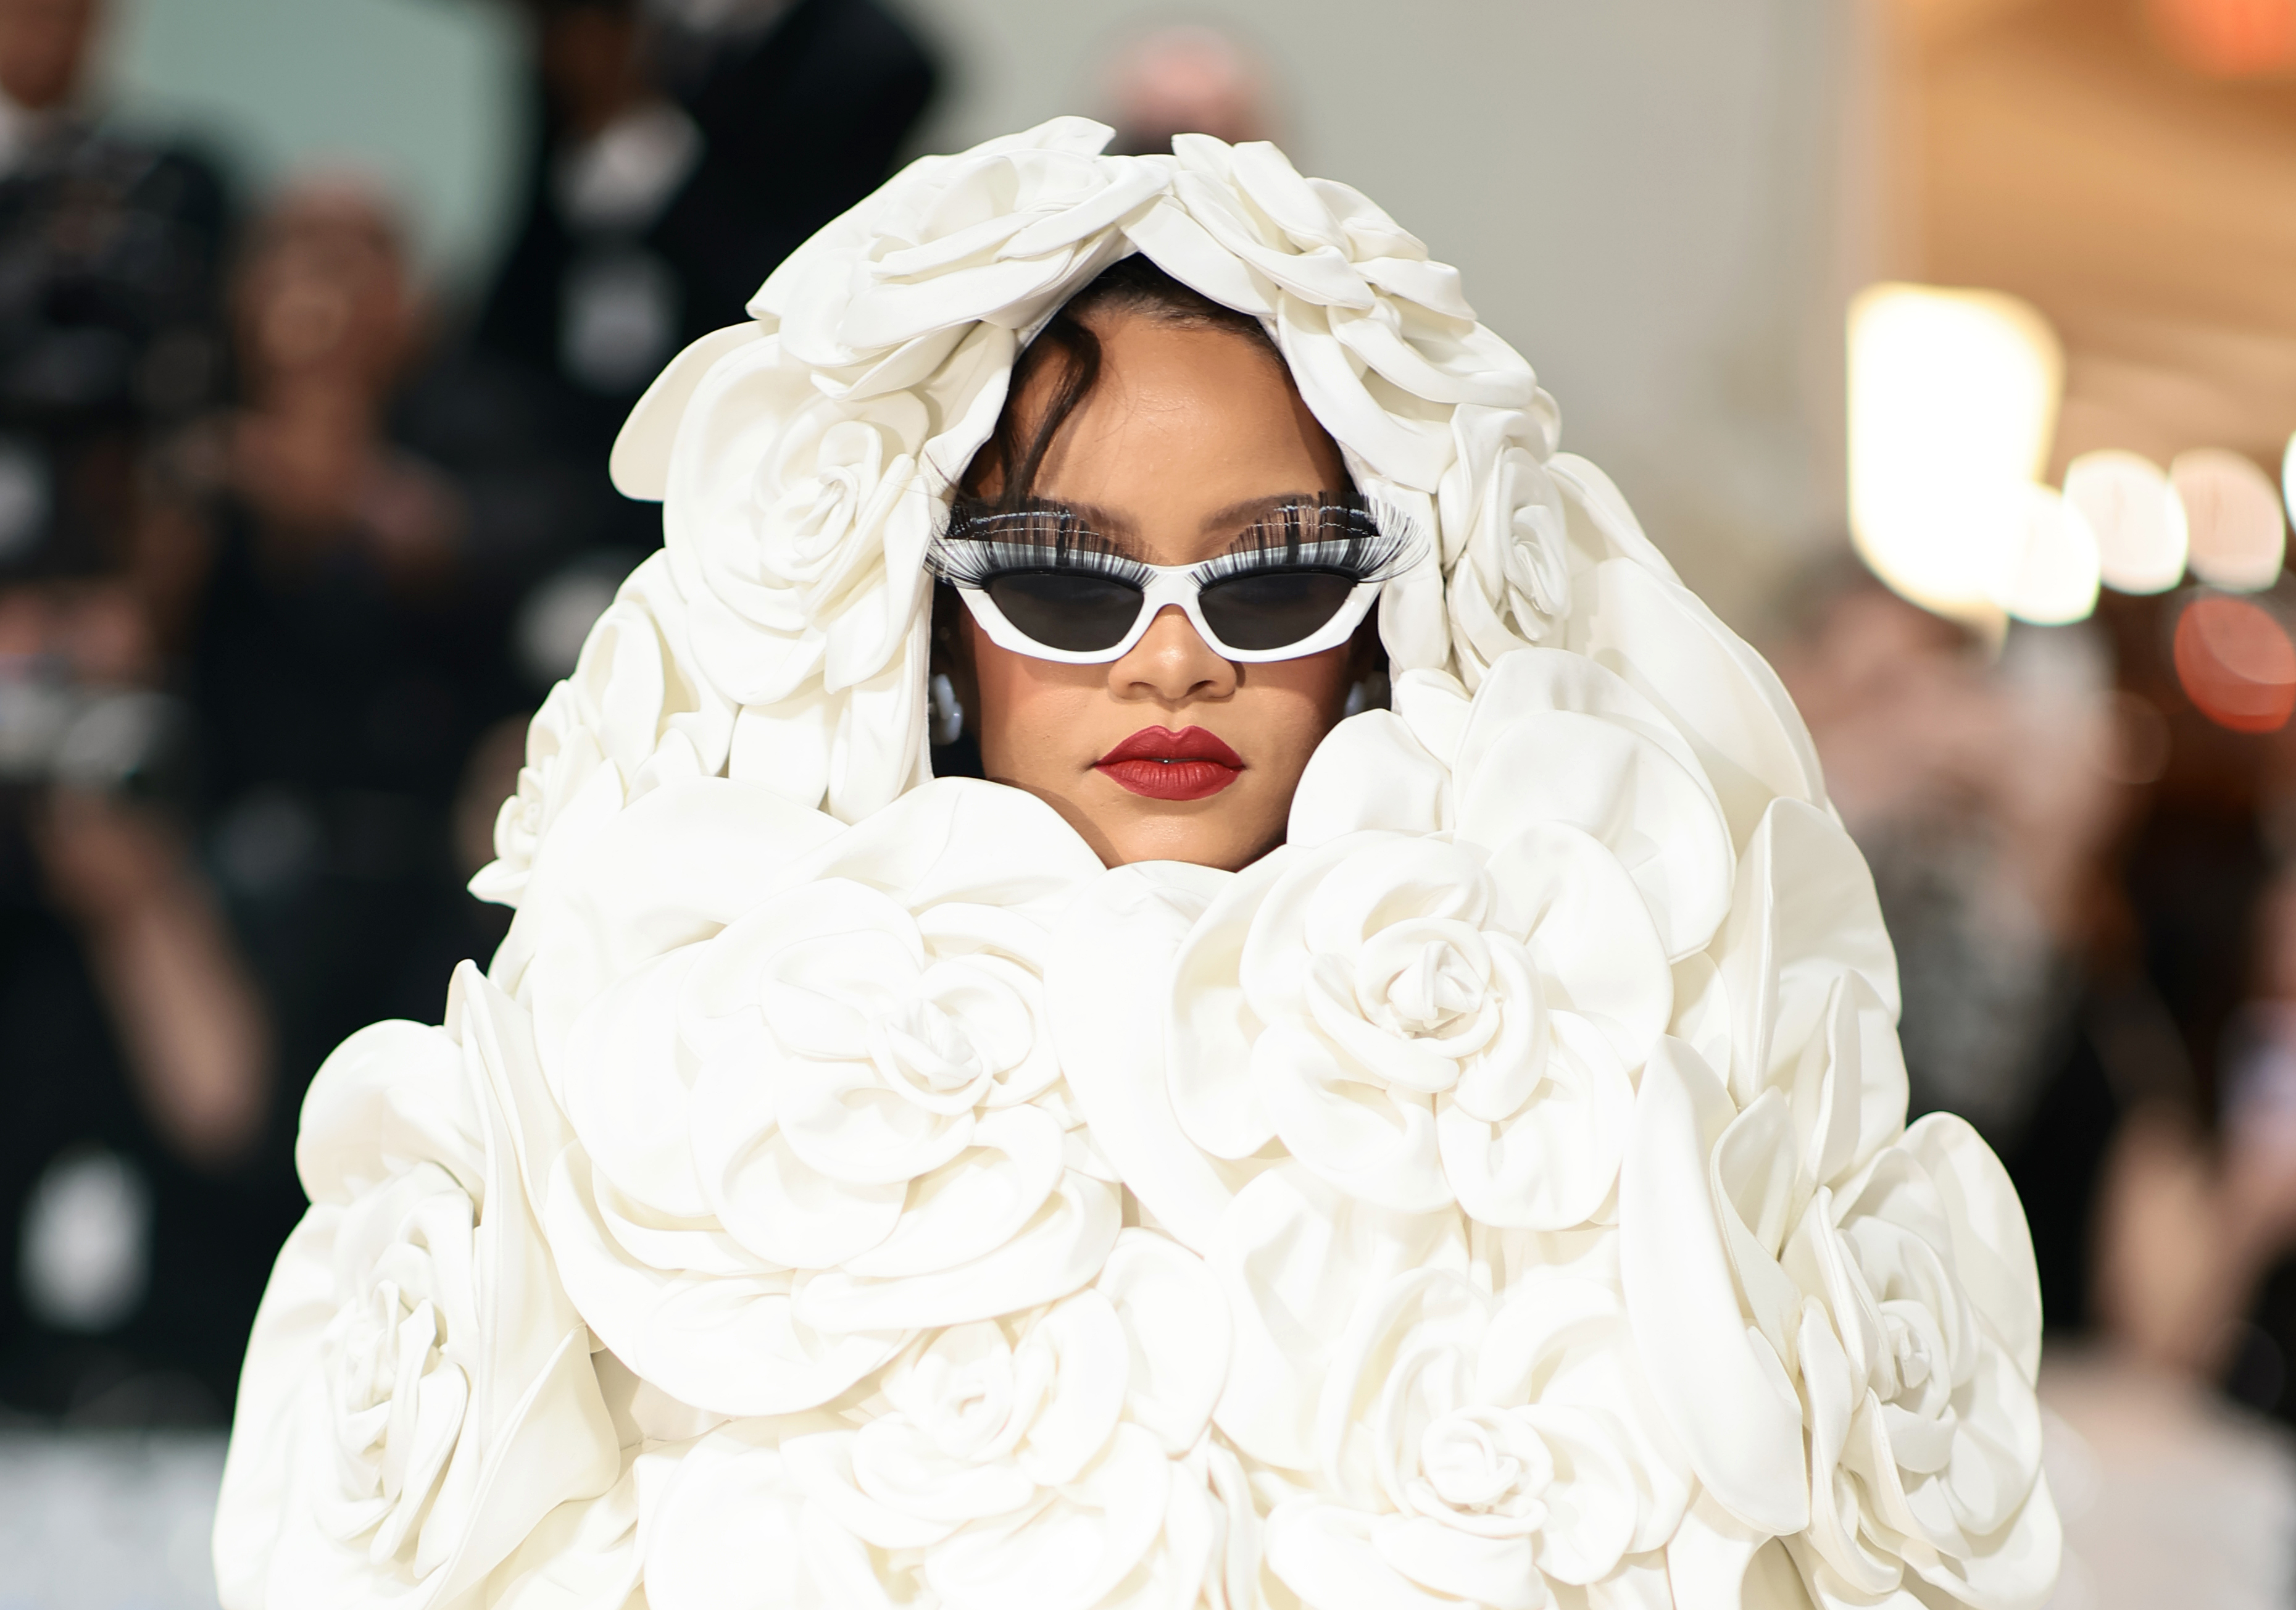 Rihanna at the 2023 Met Gala celebrating "Karl Lagerfeld: A Line of Beauty" at the Metropolitan Museum of Art in New York on May 1, 2023 | Source: Getty Images